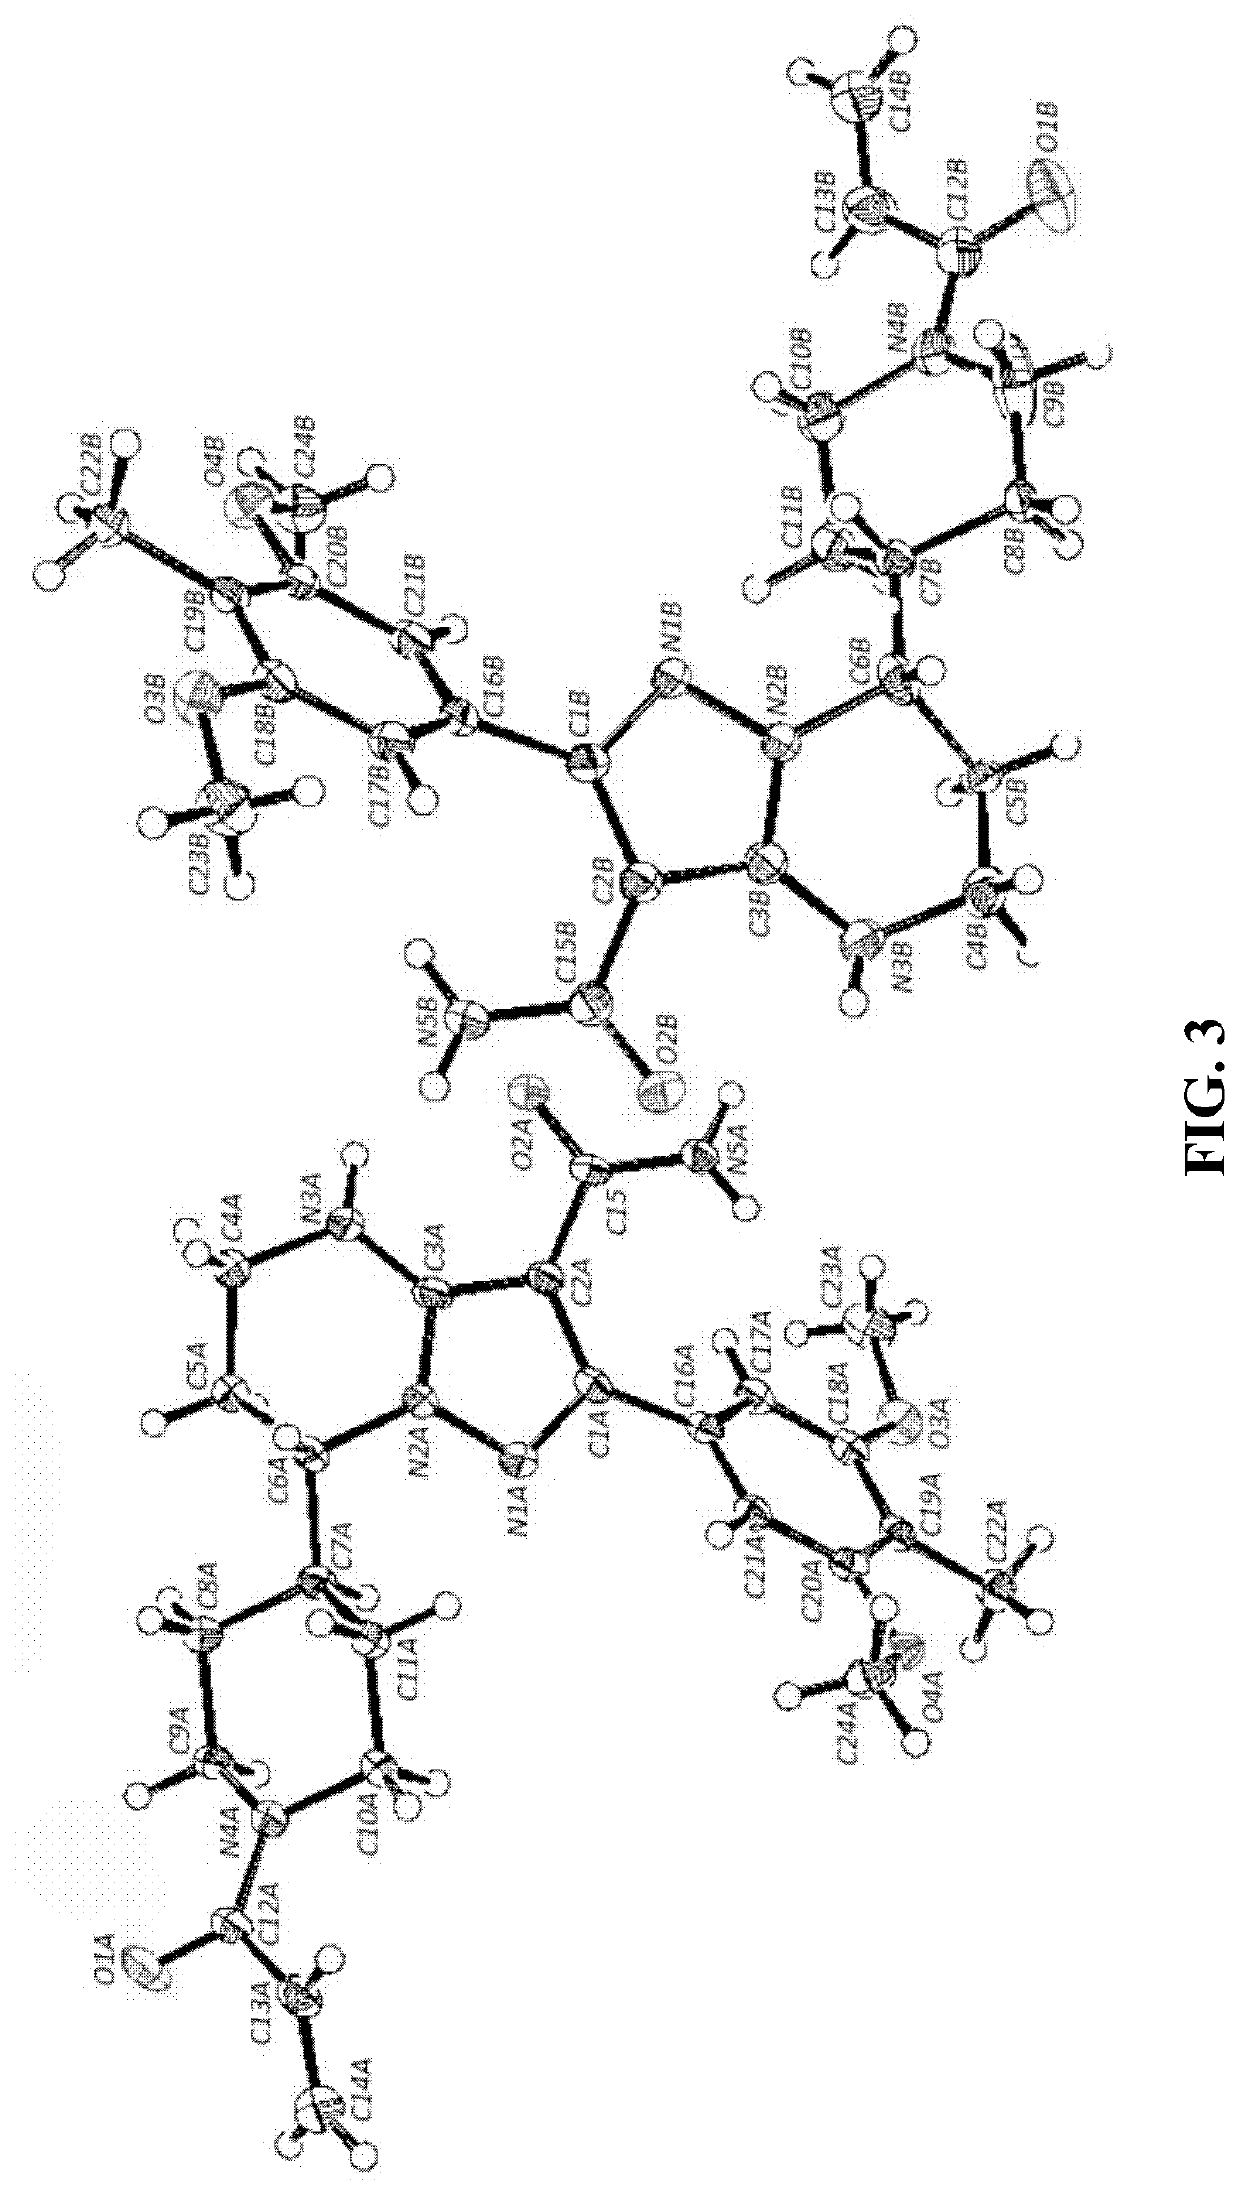 Btk inhibitors with improved dual selectivity